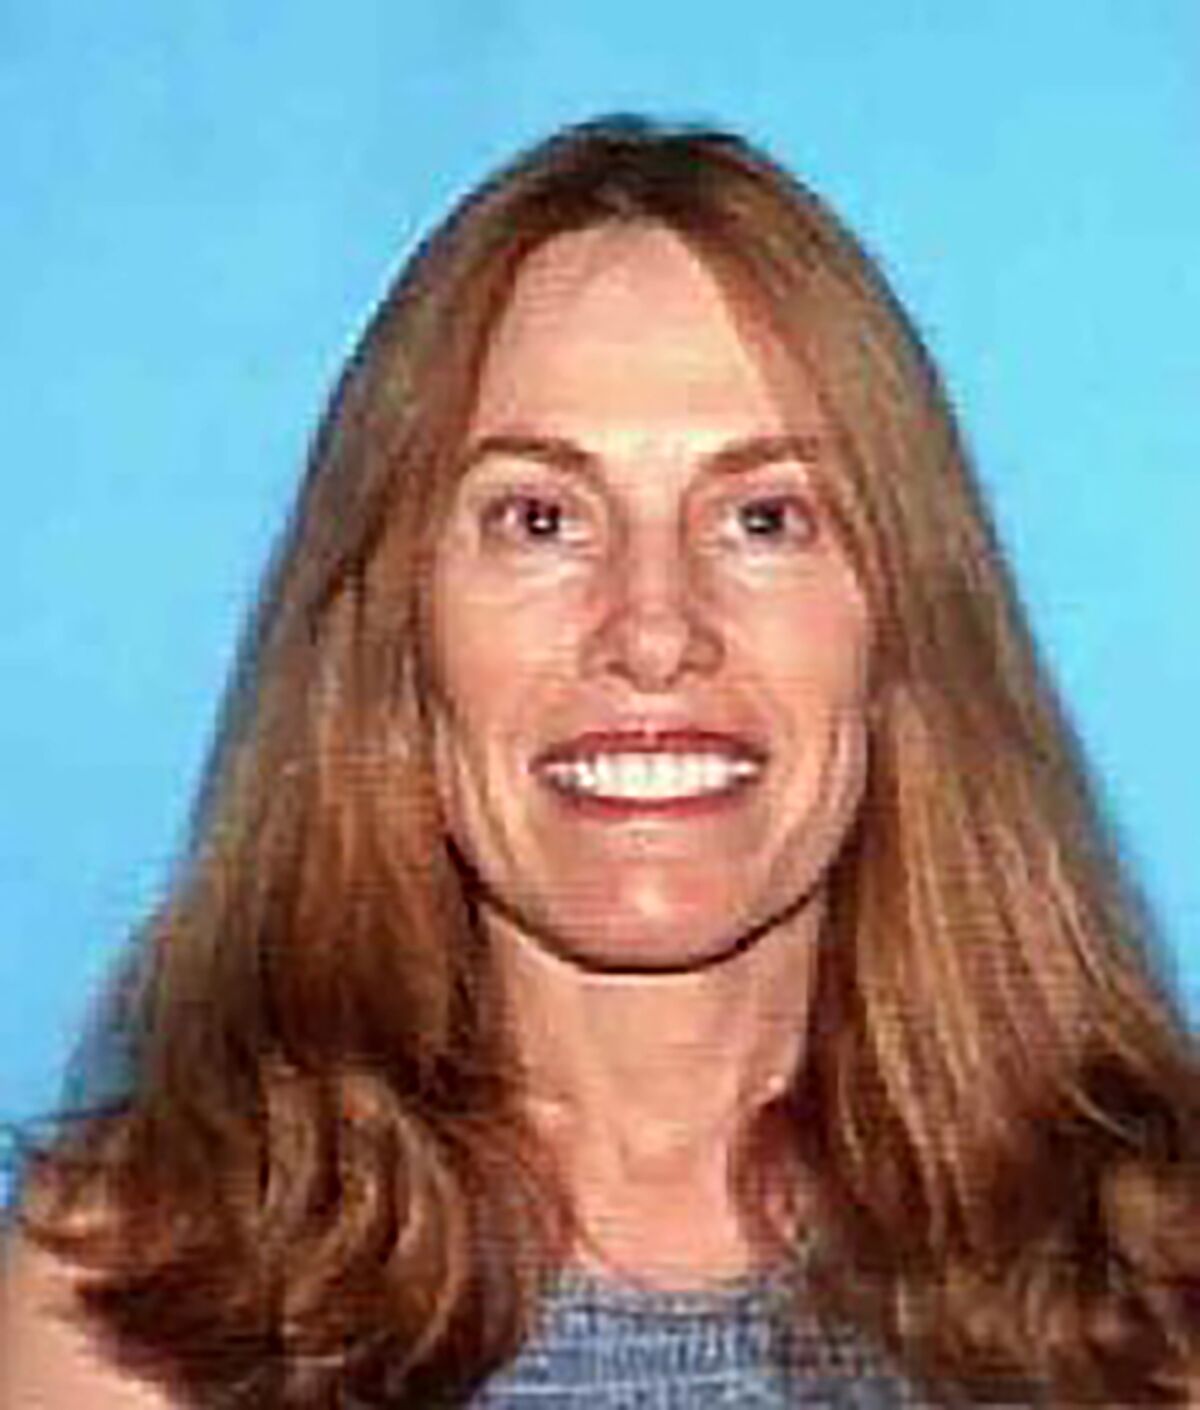 This undated photo provided by courtesy of the FBI Los Angeles shows Linda Morrow. Morrow, the former executive director of a surgical center who helped her physician husband bilk insurance companies of $44 million for cosmetic procedures billed as "medically necessary" has pleaded guilty on Friday, Feb. 4, 2022, to health care fraud. Morrow, who was captured in Israel after she fled the country following her indictment, faces up to 20 years in federal prison. Her husband, Dr. David Morrow, is serving a 20-year term. (FBI Los Angeles via AP)